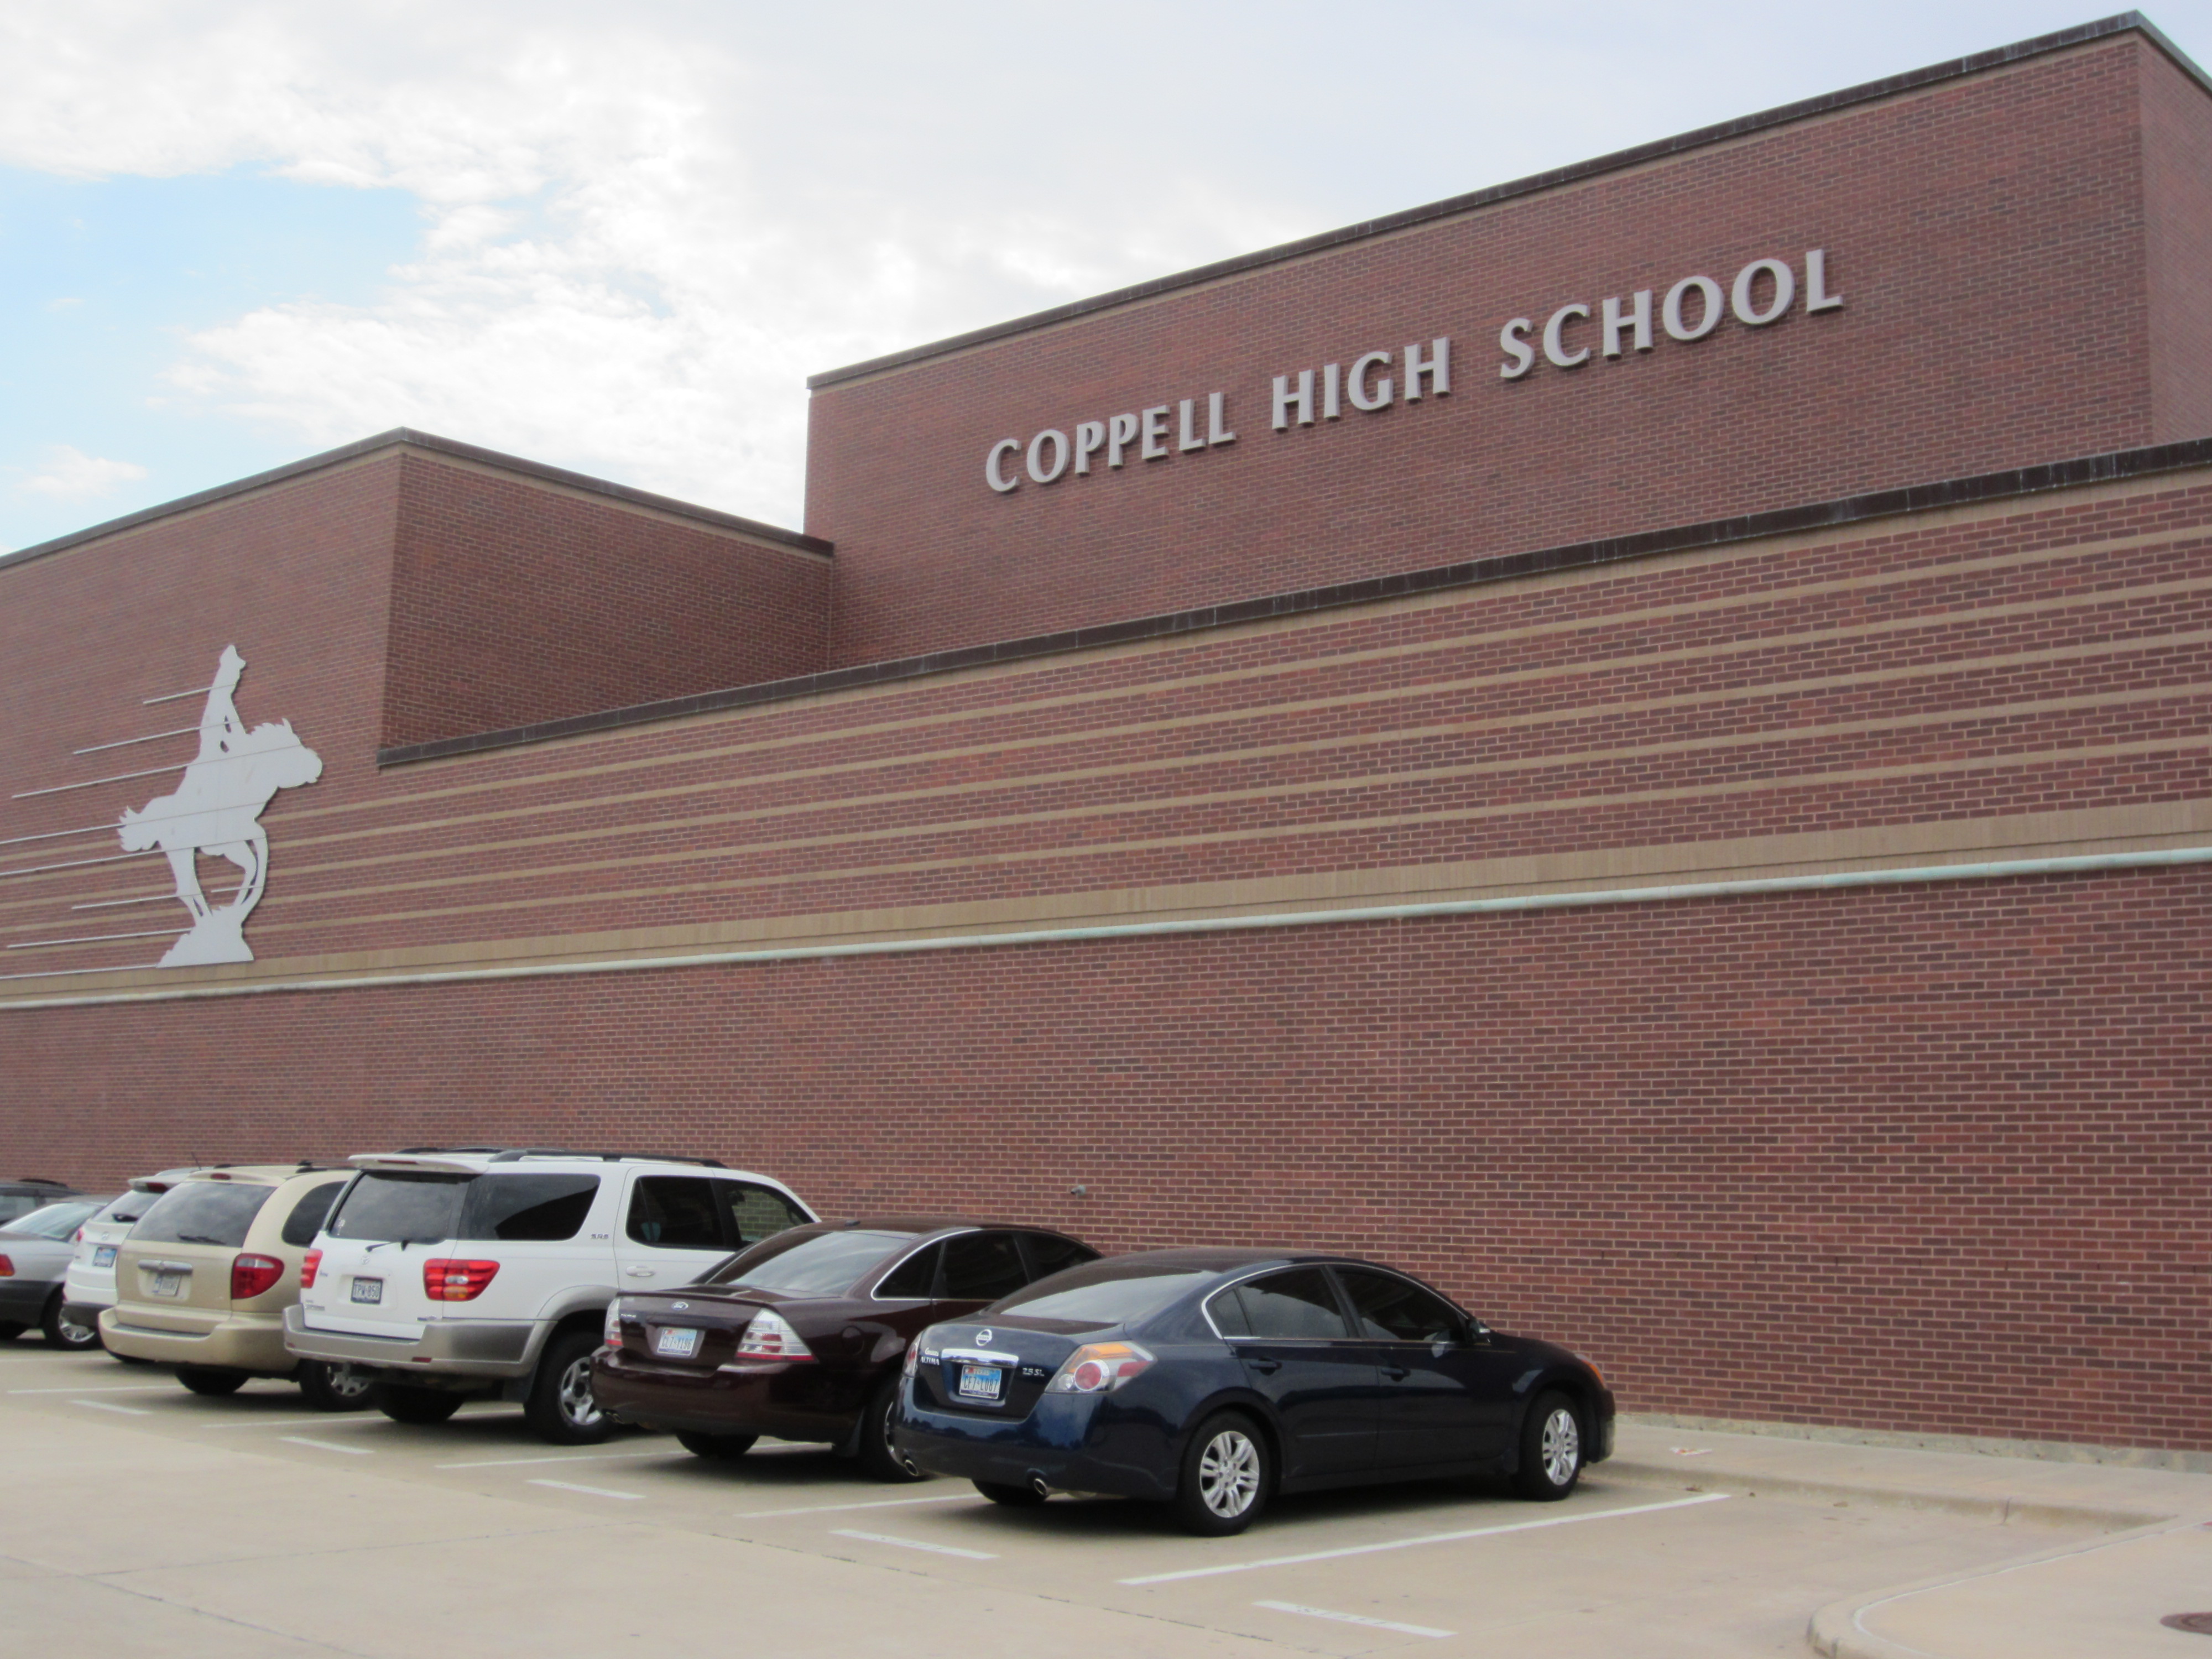 Coppell High School hosting Parade on Monday Coppell